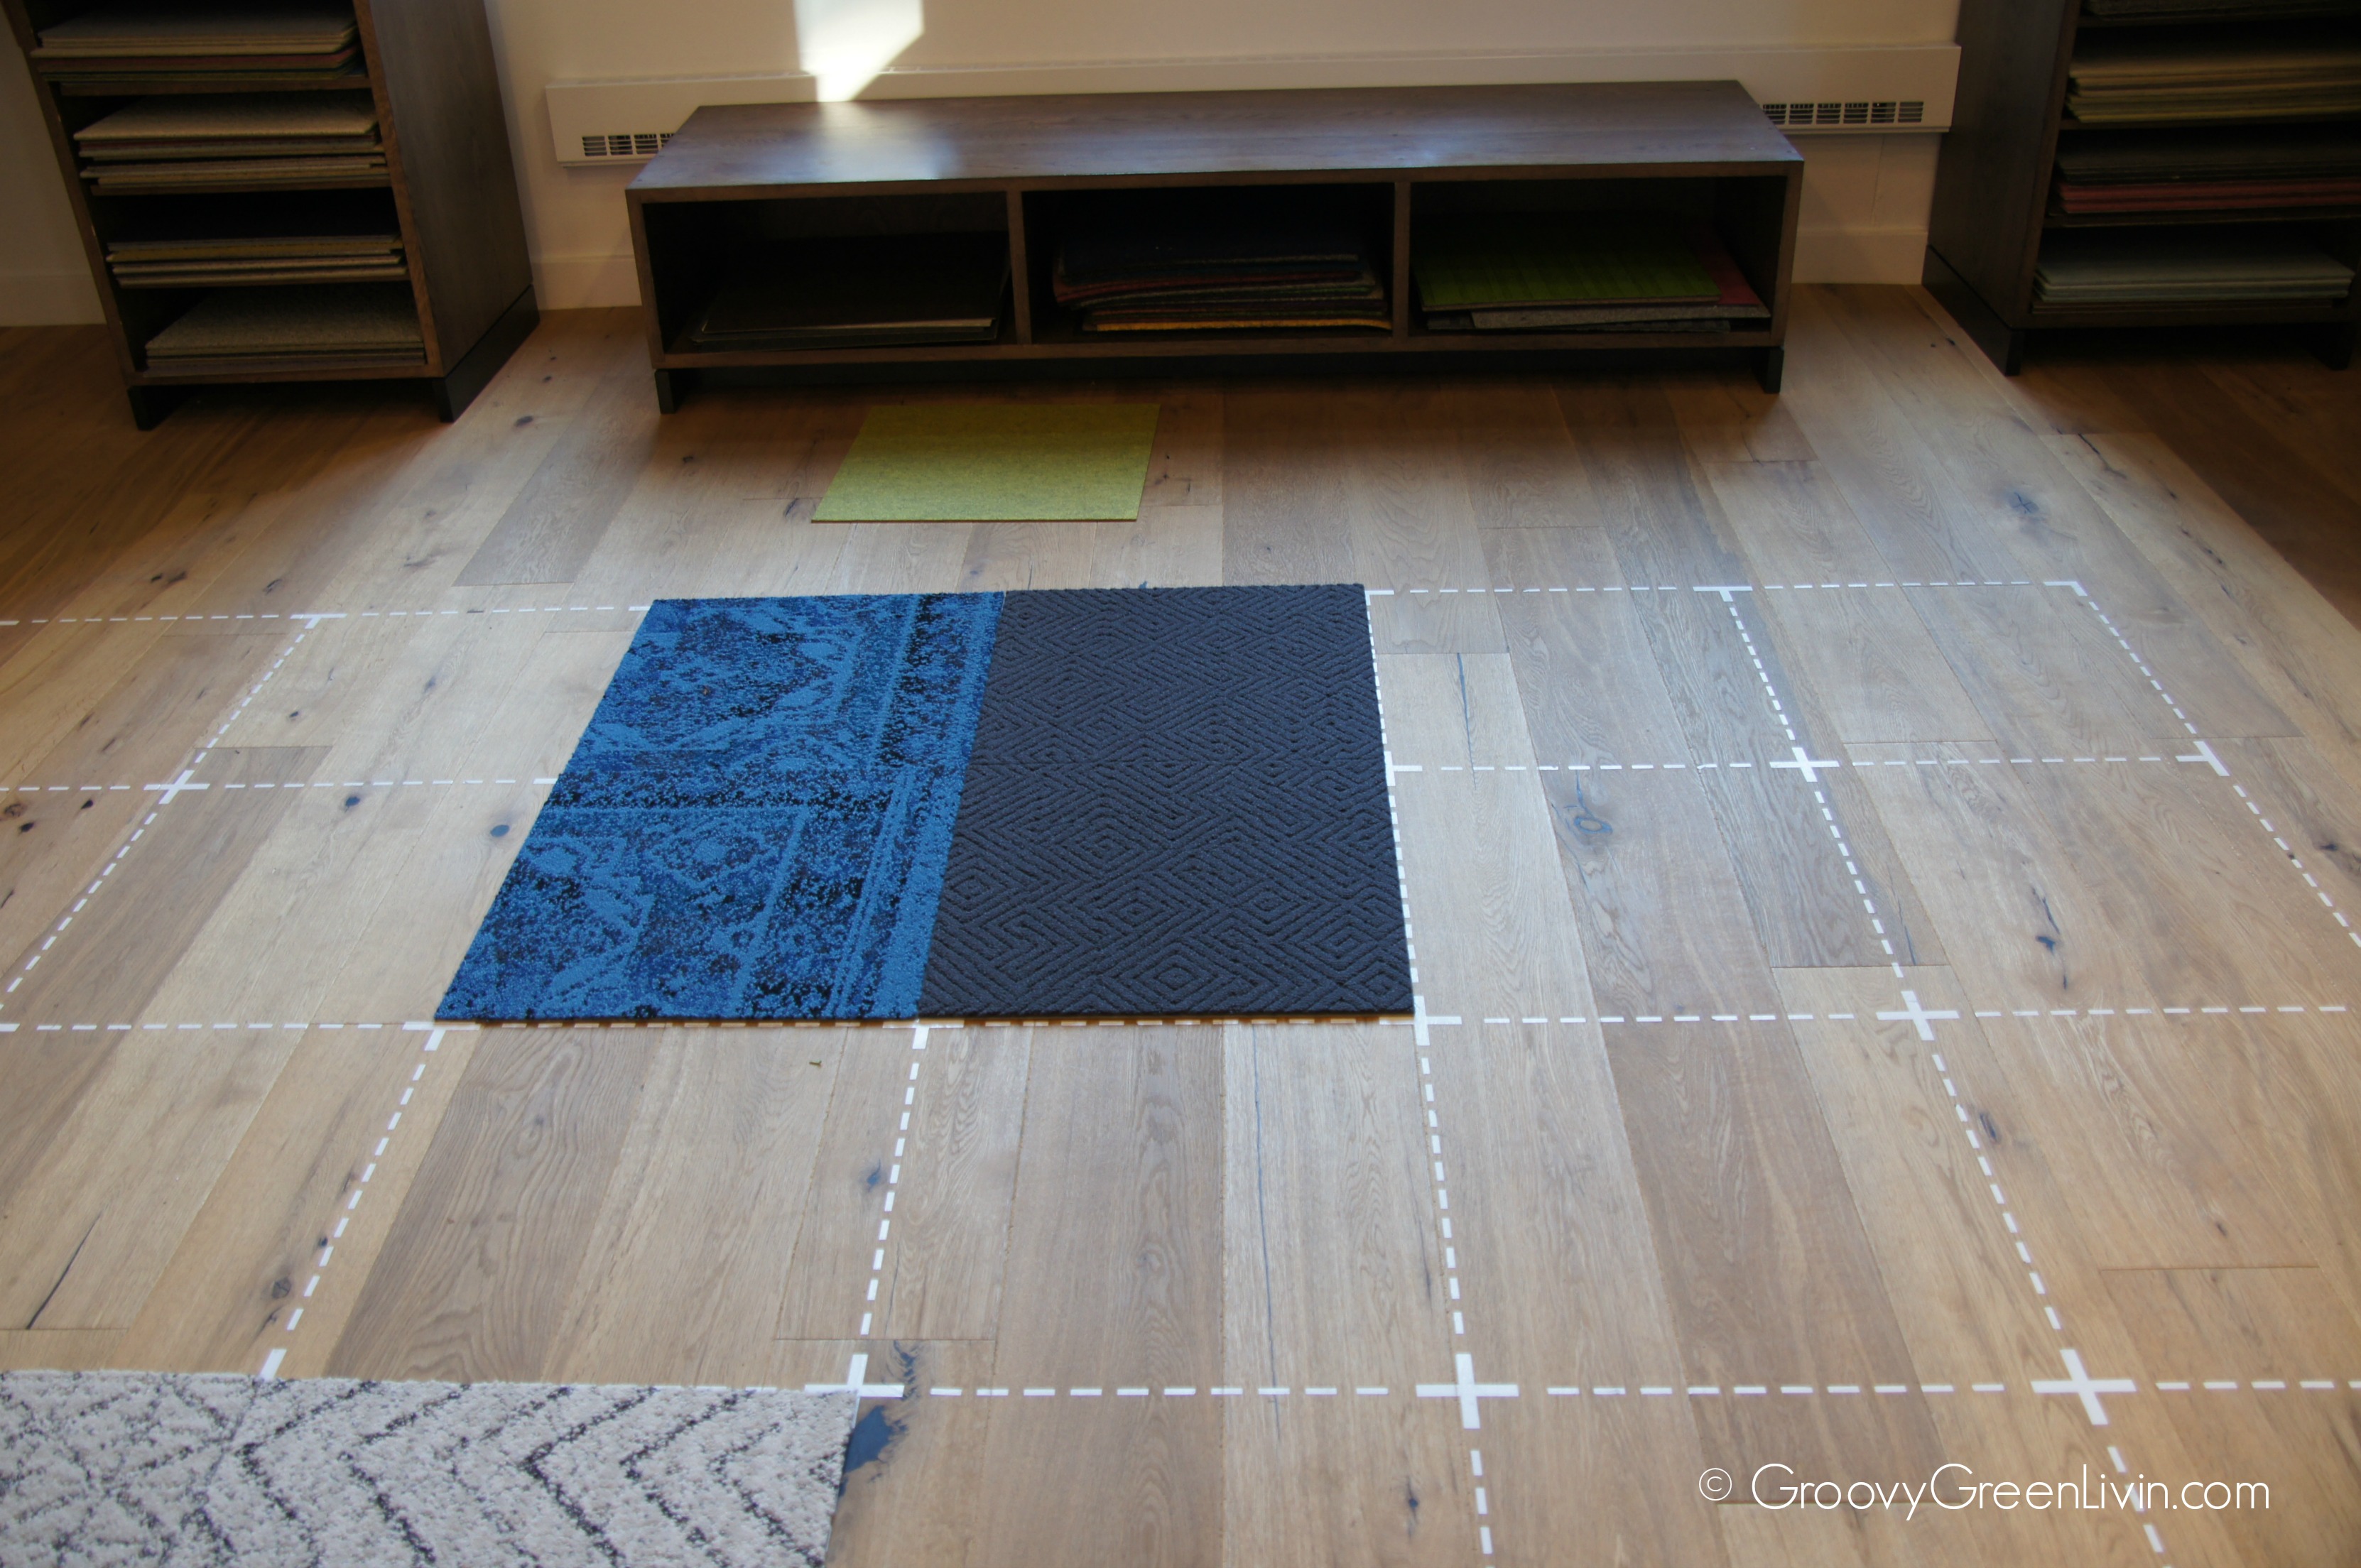 Go Green At Home With Recyclable Carpet, Flor Carpet Tiles Review